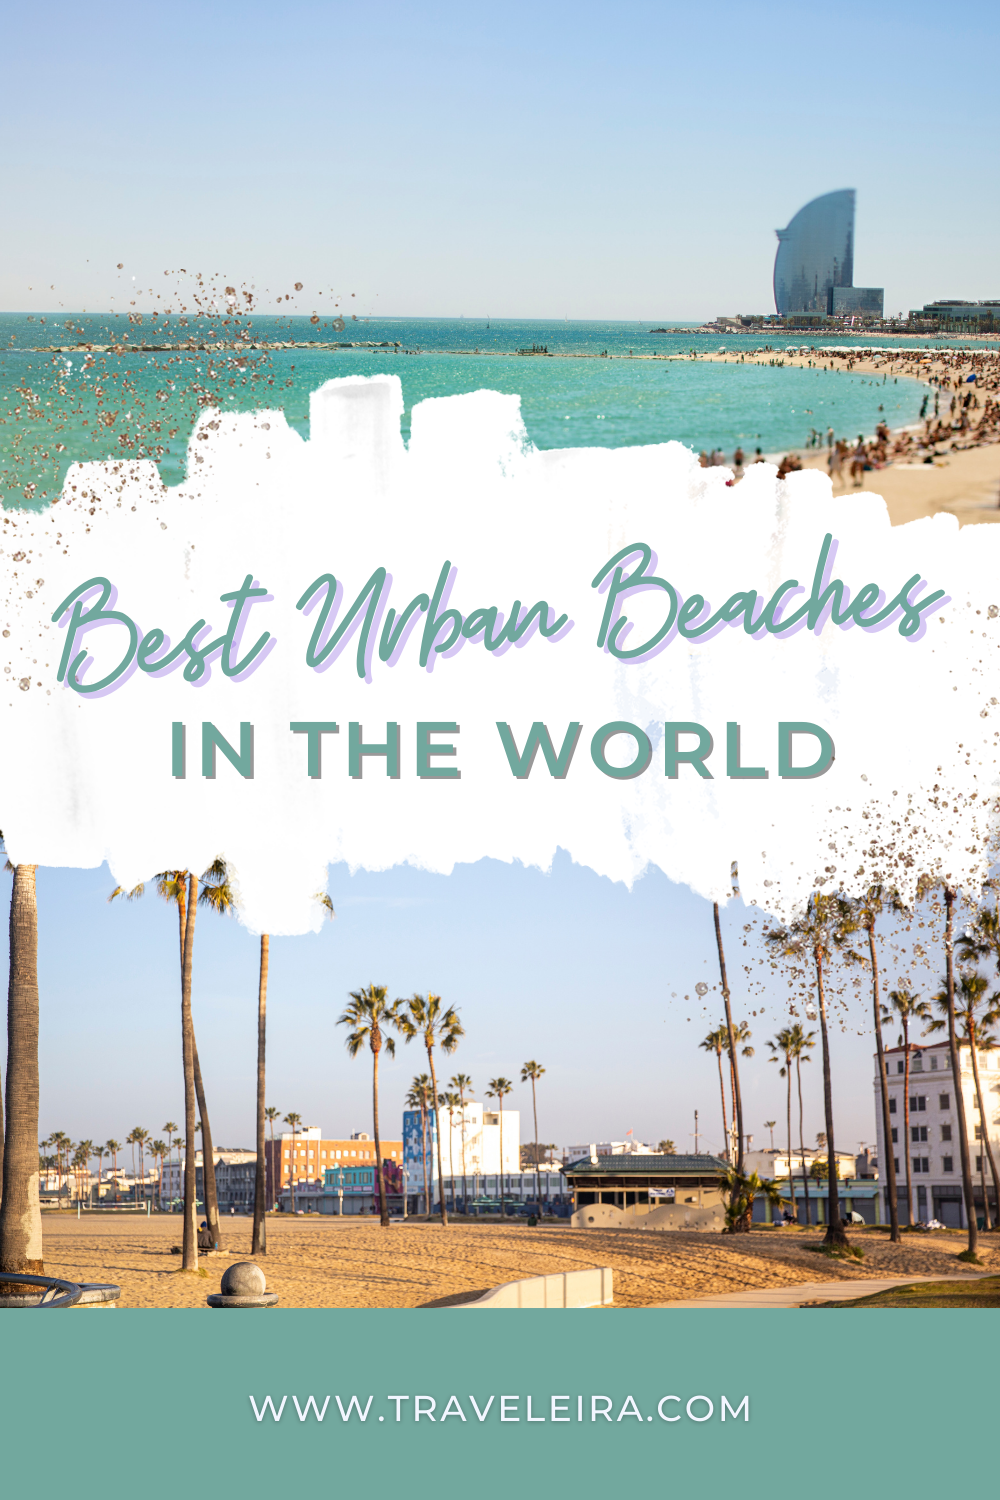 Experience the best of both worlds - city and beach - at the 12 Best Urban Beaches. Dive into sun-soaked fun and vibrant culture!